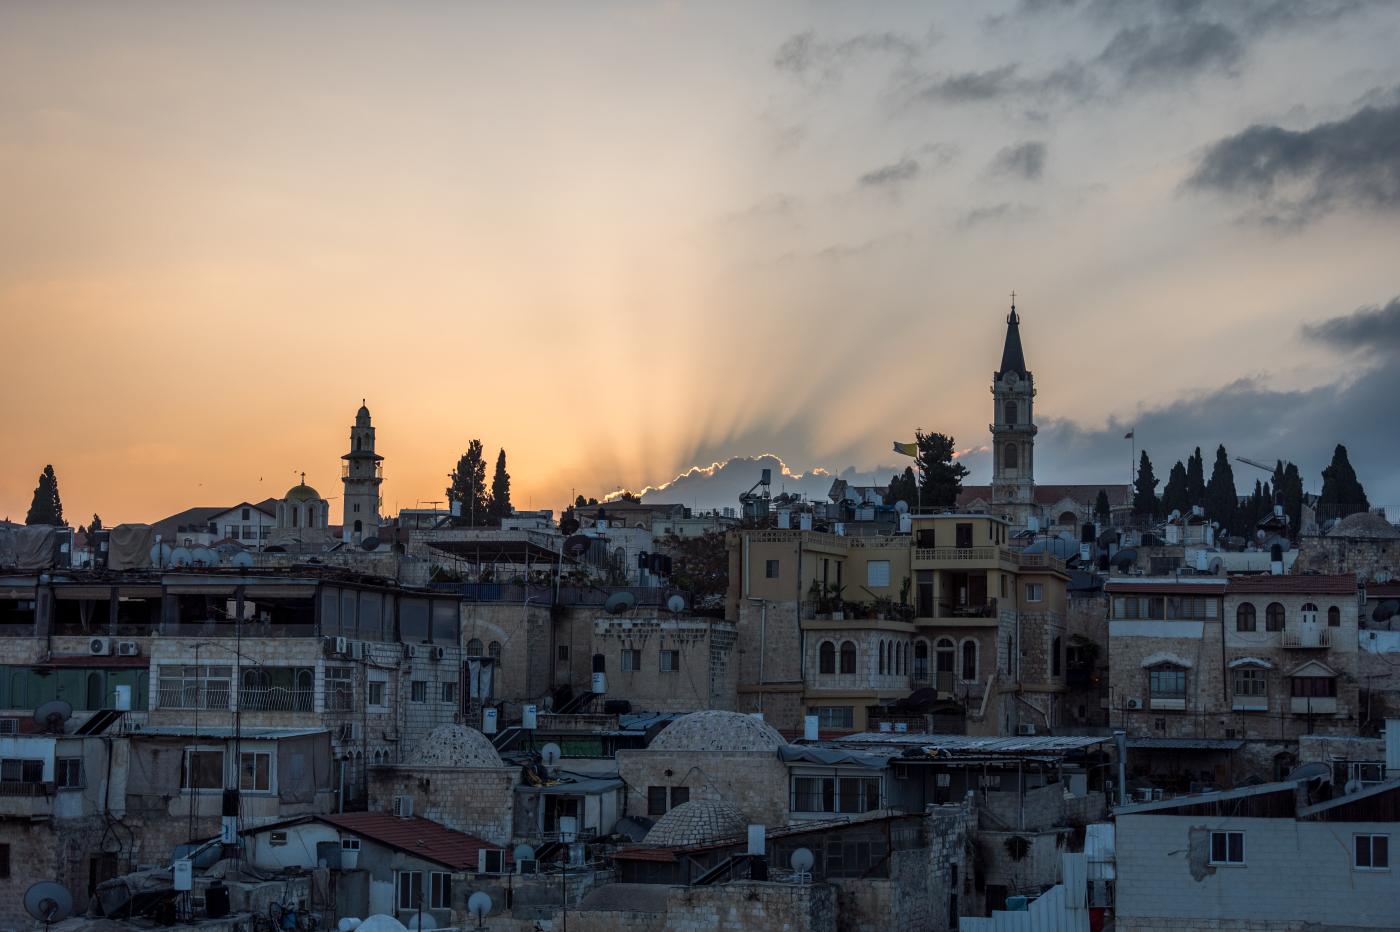 sunrise over Palestine by Albin Hillert of the world Council of Churches